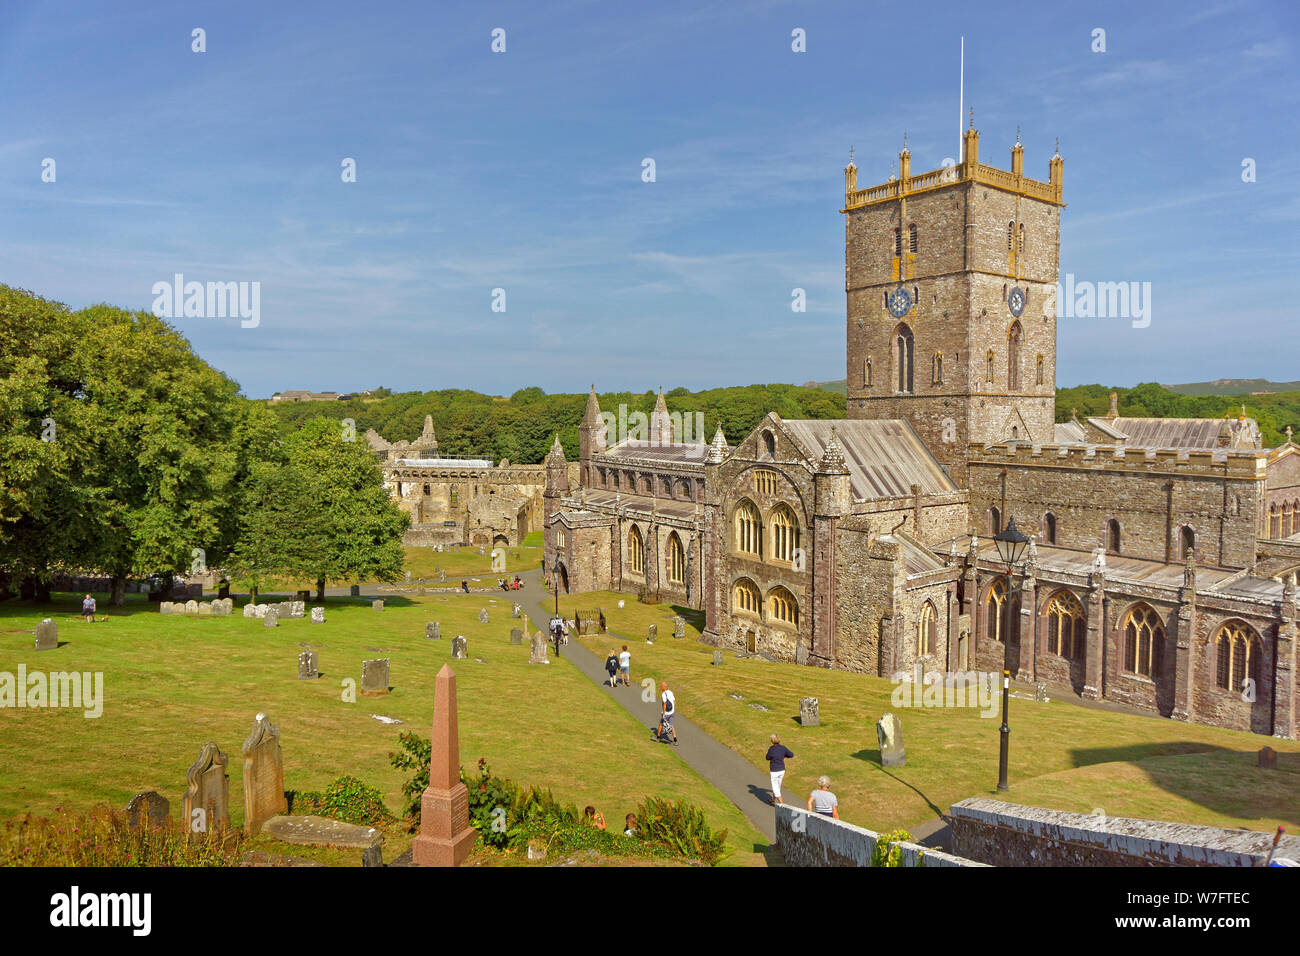 St David's Cathedral in St David's City, Pembrokeshire, Wales. Stockfoto